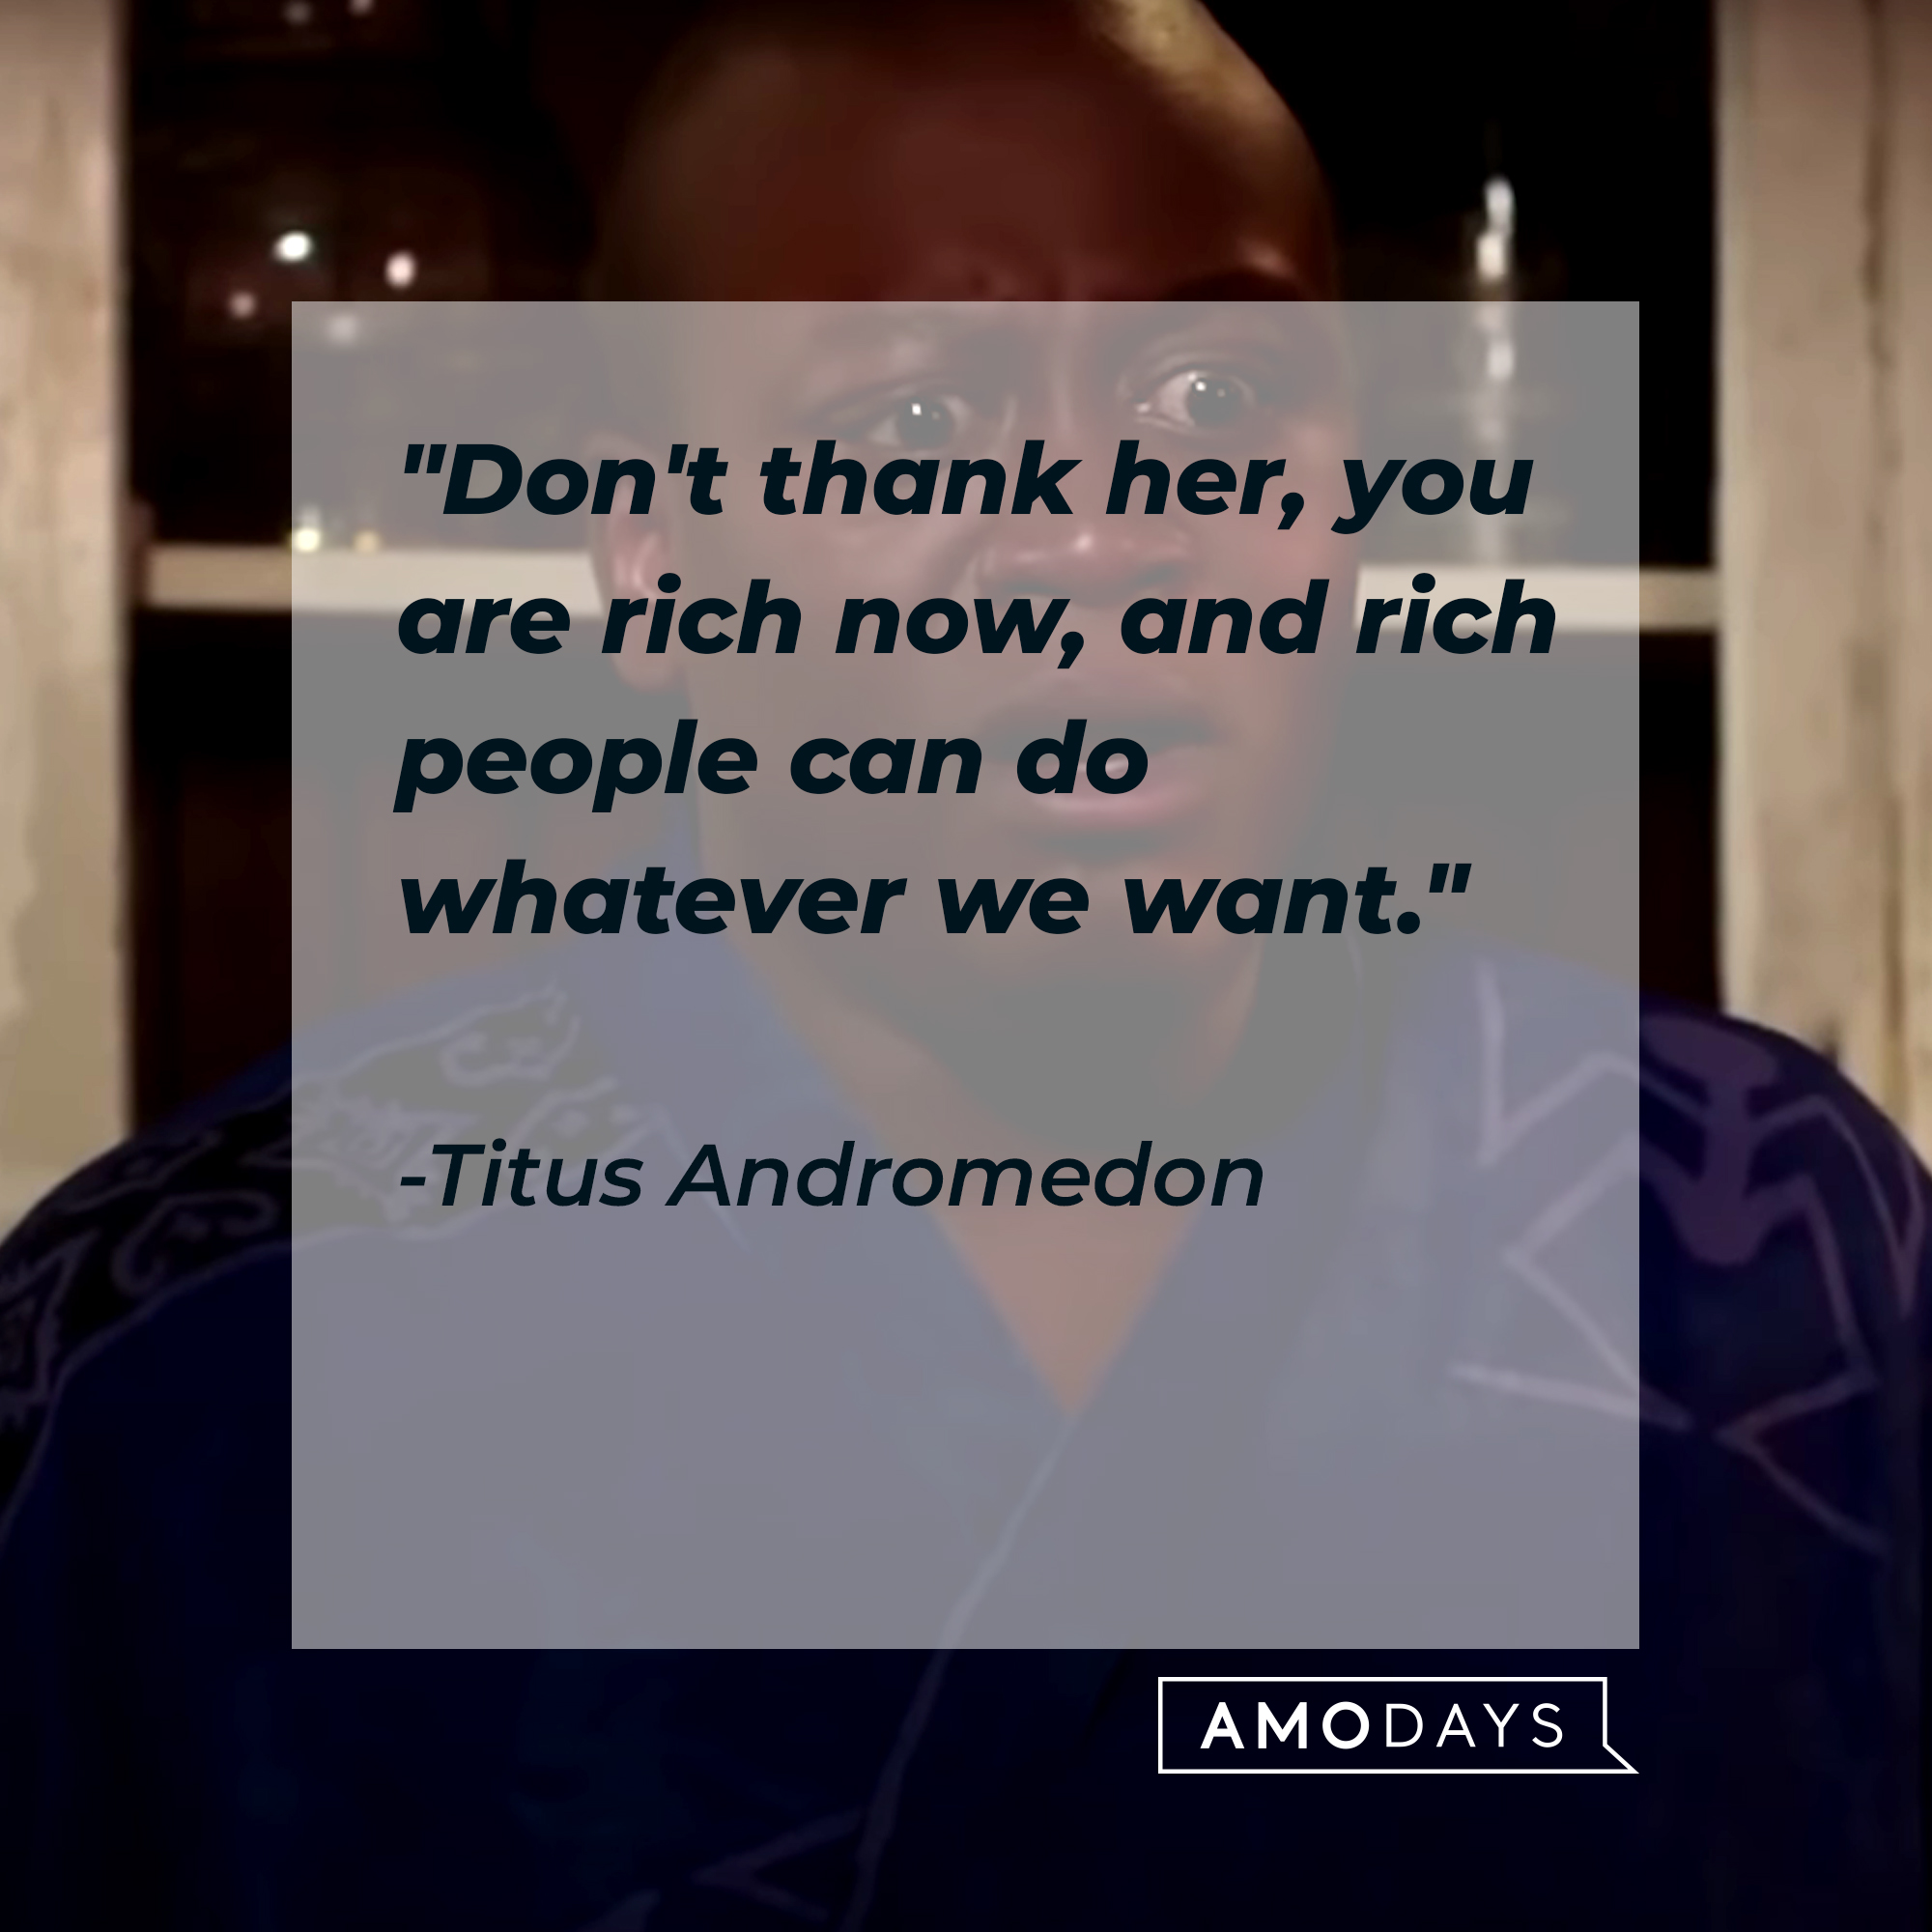 A photo of Titus Andromedon with the quote, "Don't thank her, you are rich now, and rich people can do whatever we want." | Source: YouTube/Netflix